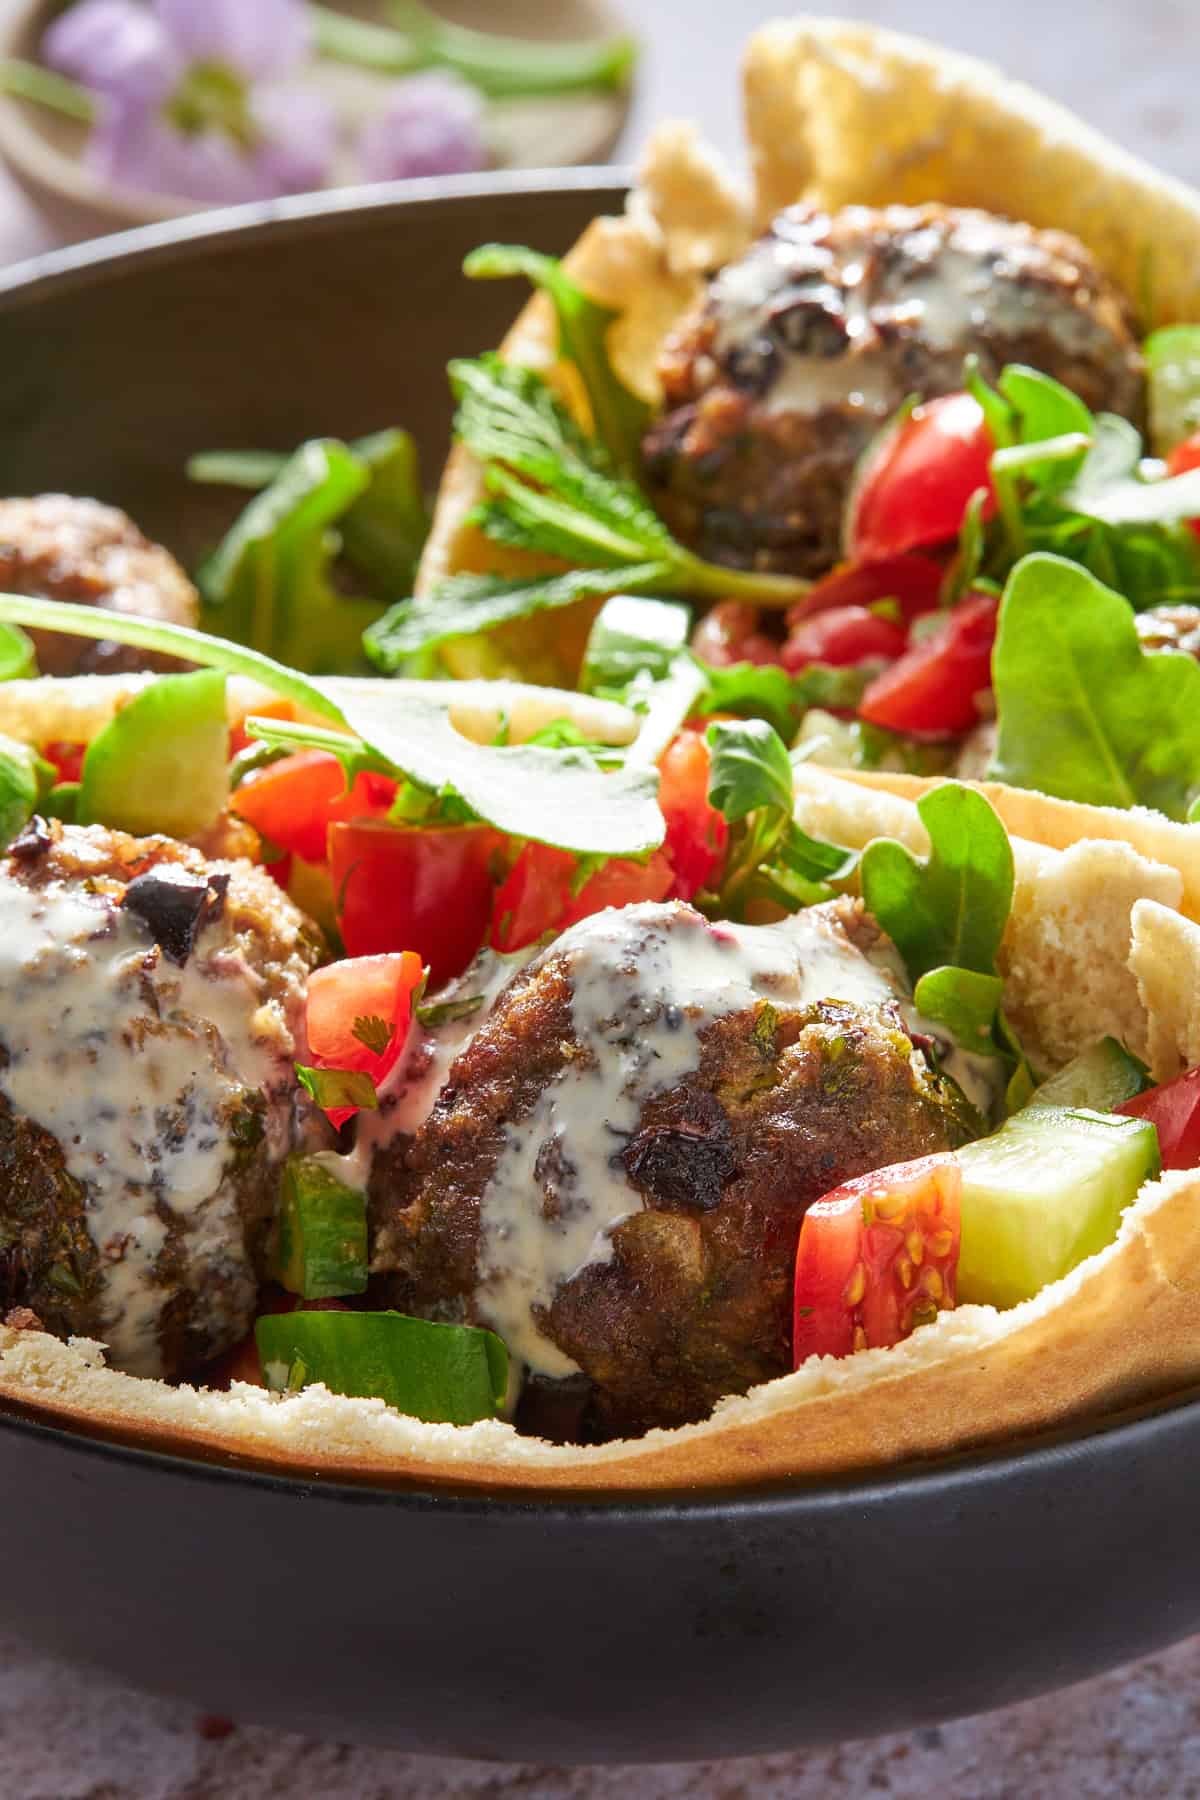 Two pitas with beef meatballs, tomato and cucumber salad, and tahini sauce.